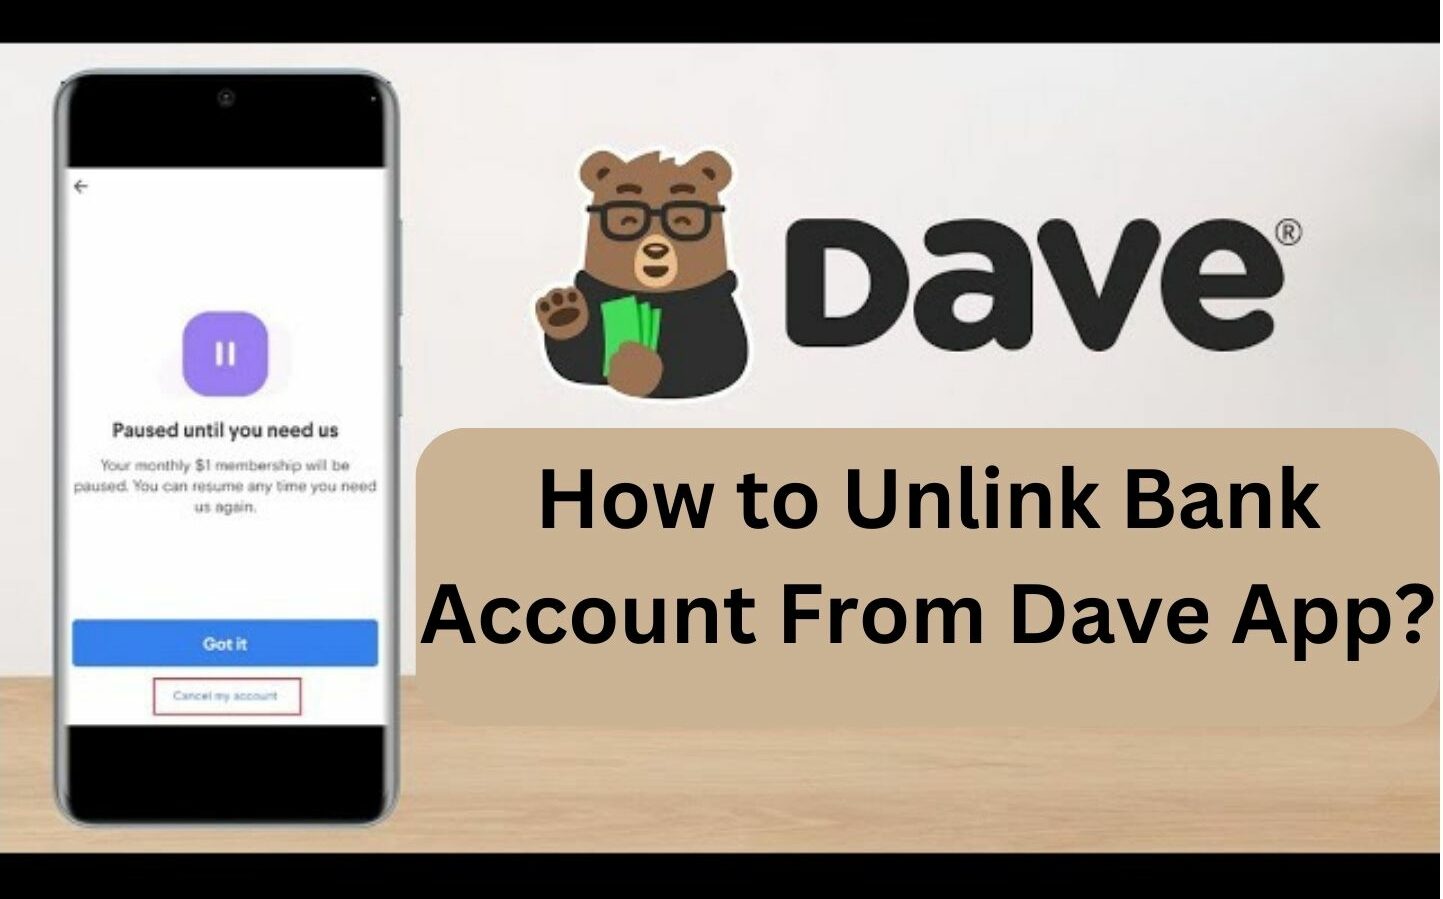 How to Unlink Bank Account From Dave App?